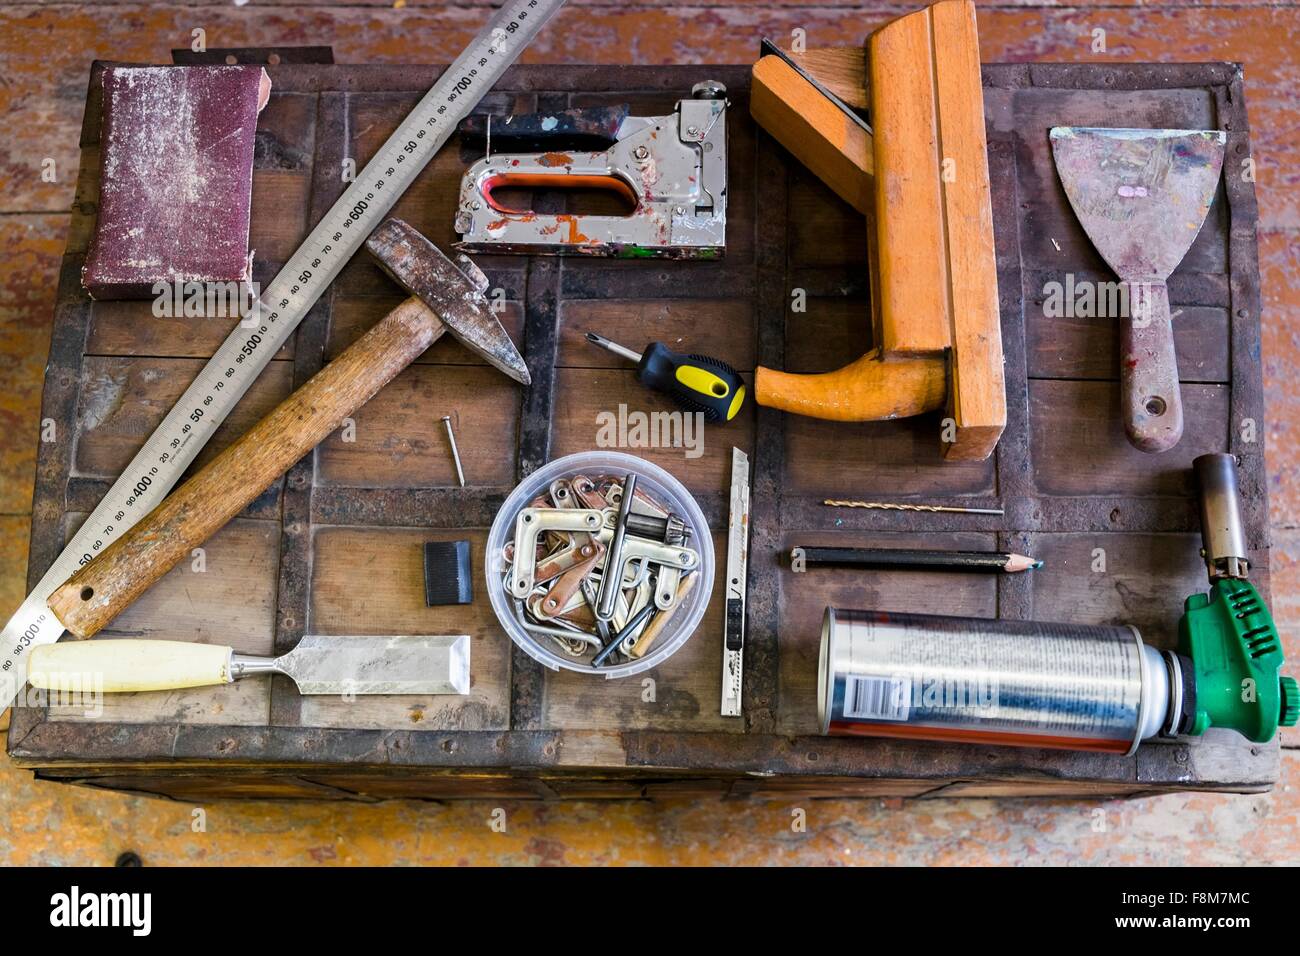 Overhead view of hand tools on wooden trunk suitcase Stock Photo